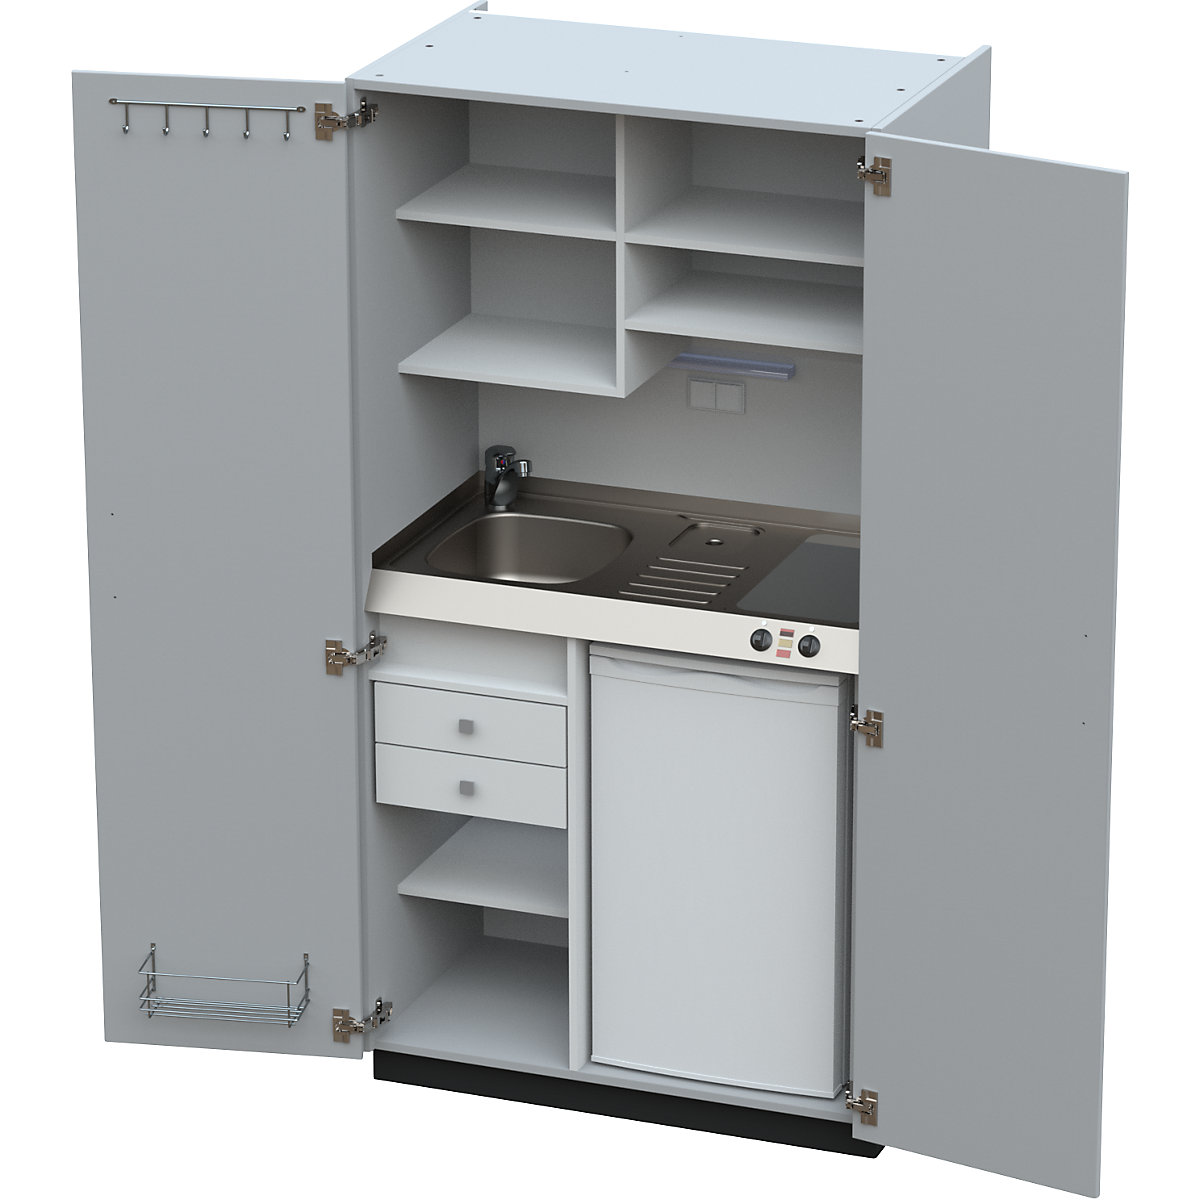 Kitchen unit with hinged doors, 2 glass ceramic hotplates, basin at left, grey, 1956 x 1000 x 650 mm-11